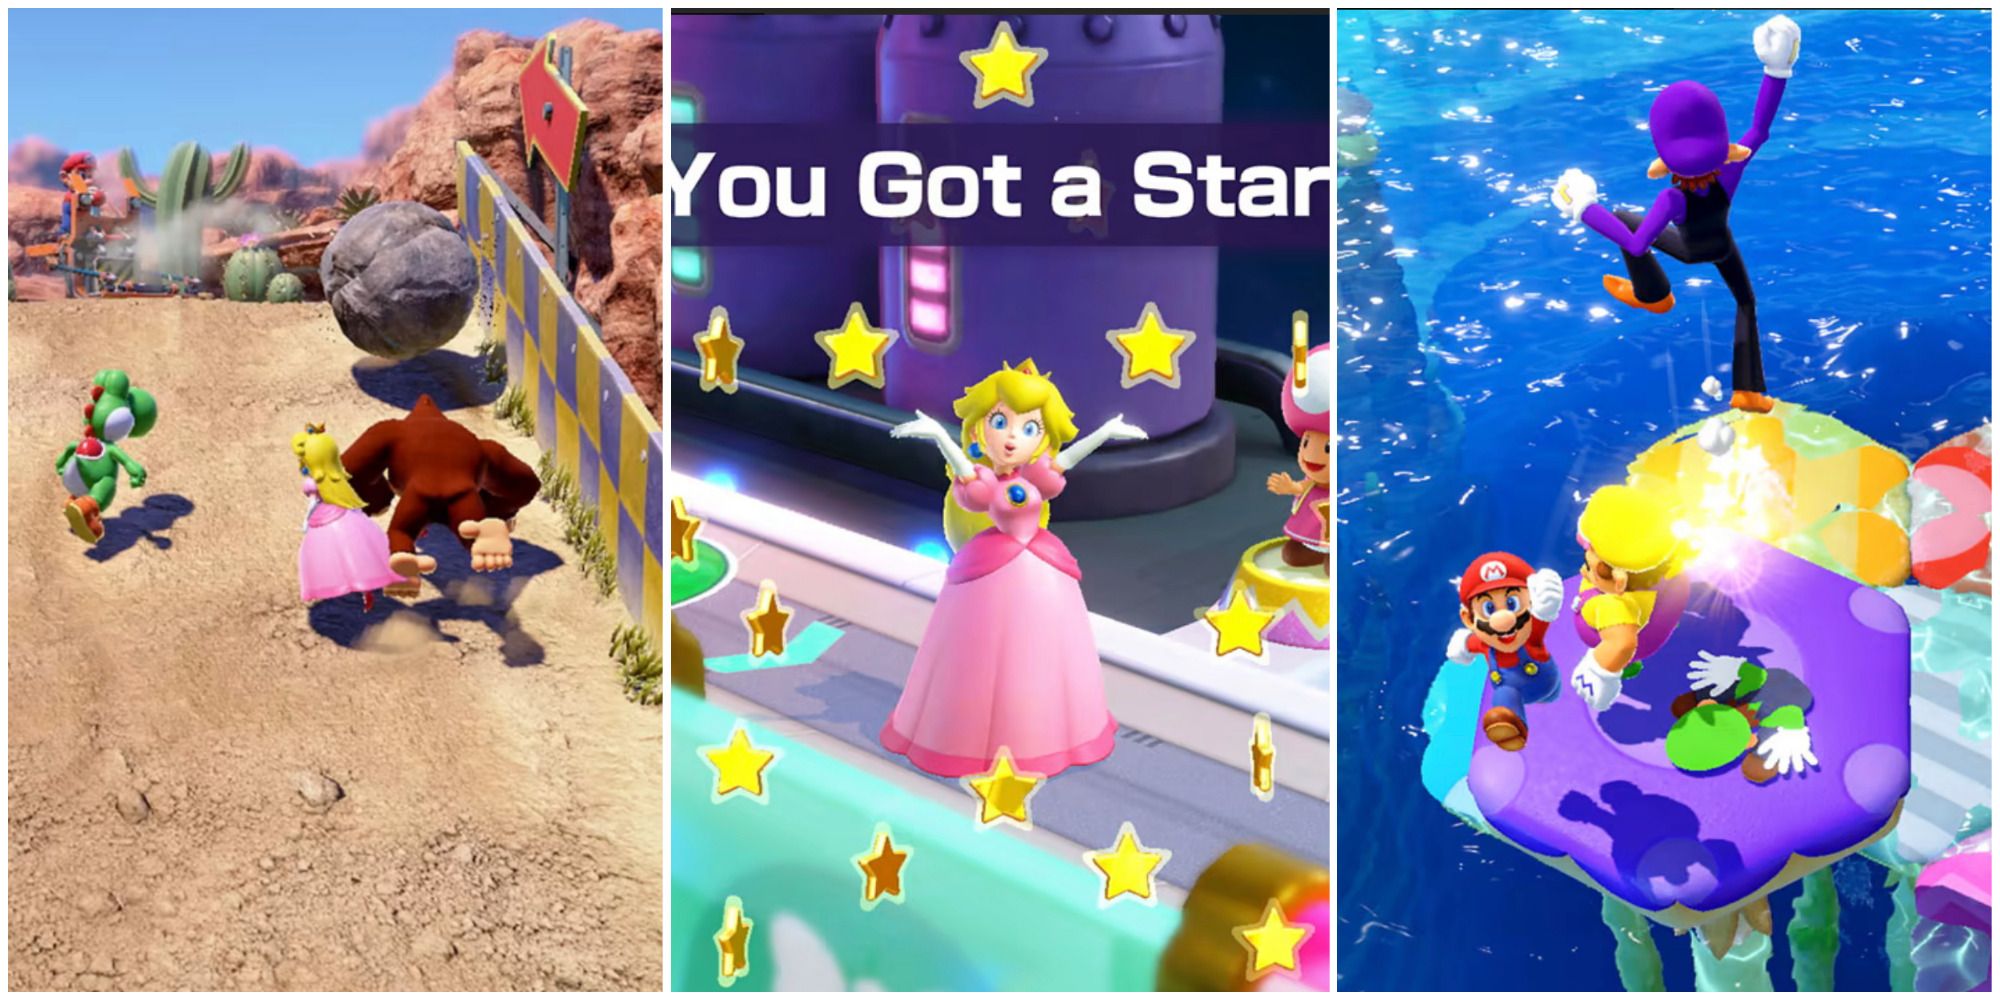 yoshi, peach, DK running up hill, peach getting a star, waluigi jumping on characters mario party superstar